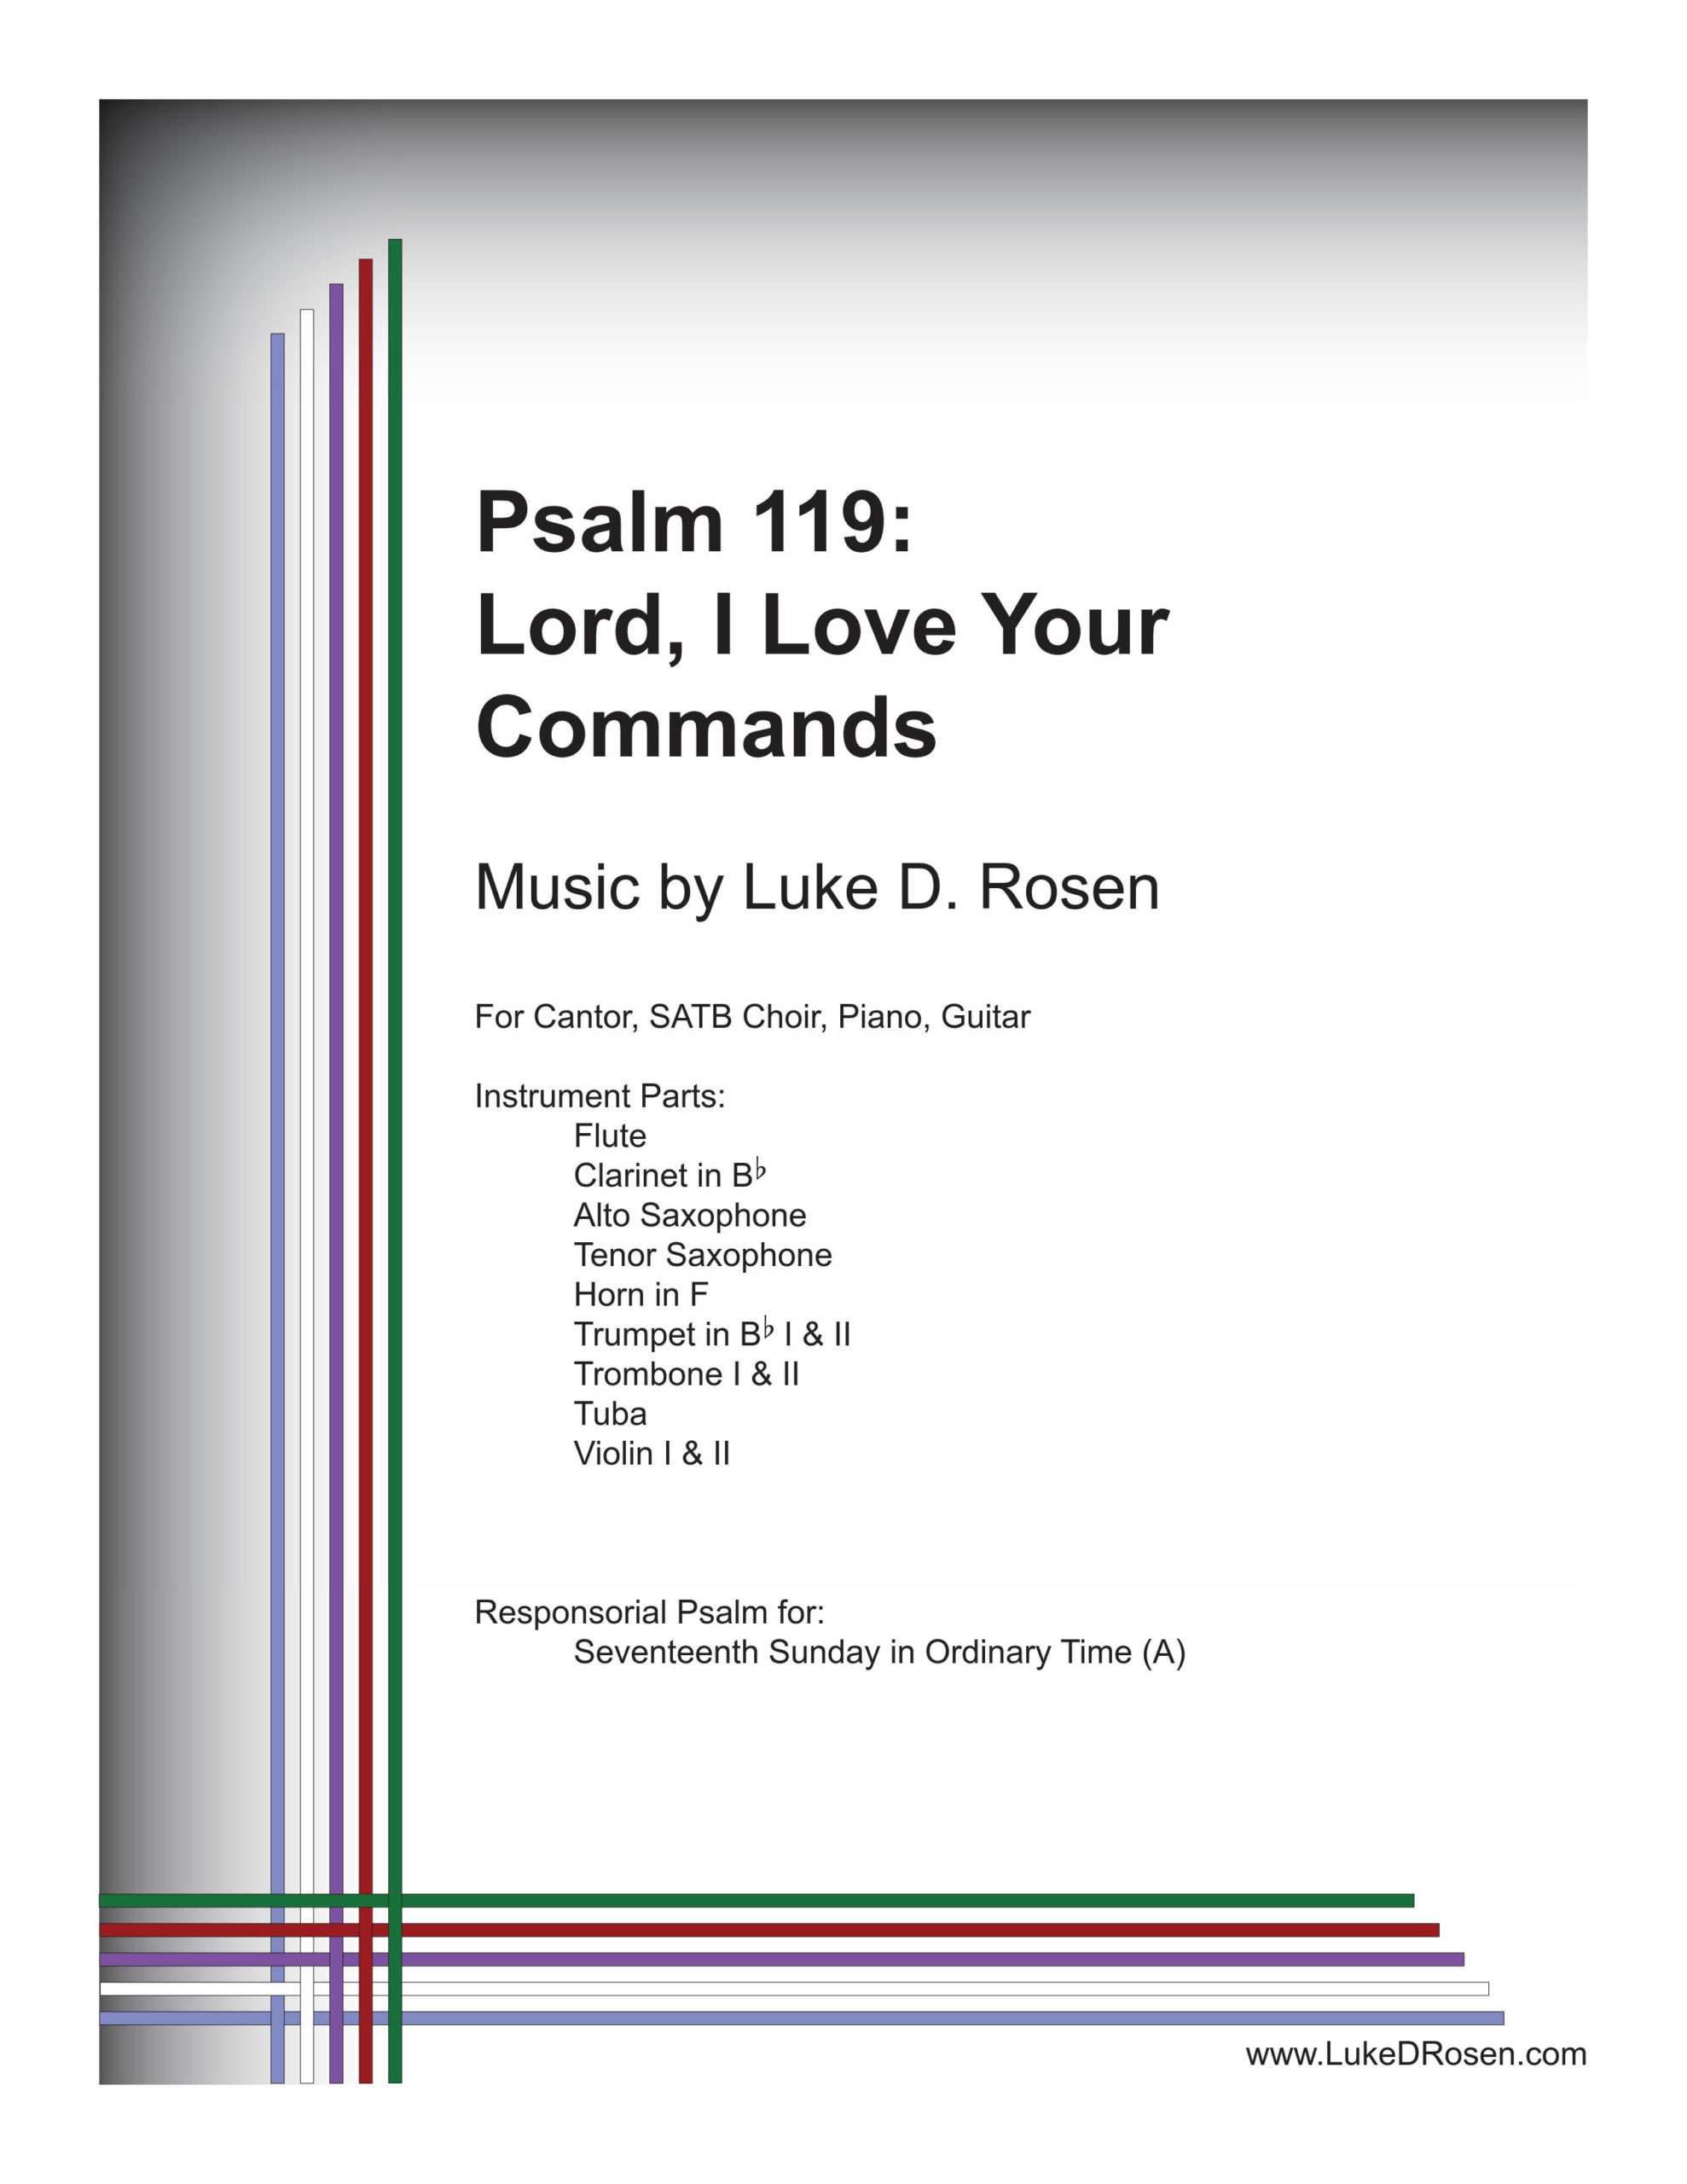 Psalm 119 – Lord, I Love Your Commands (Rosen)